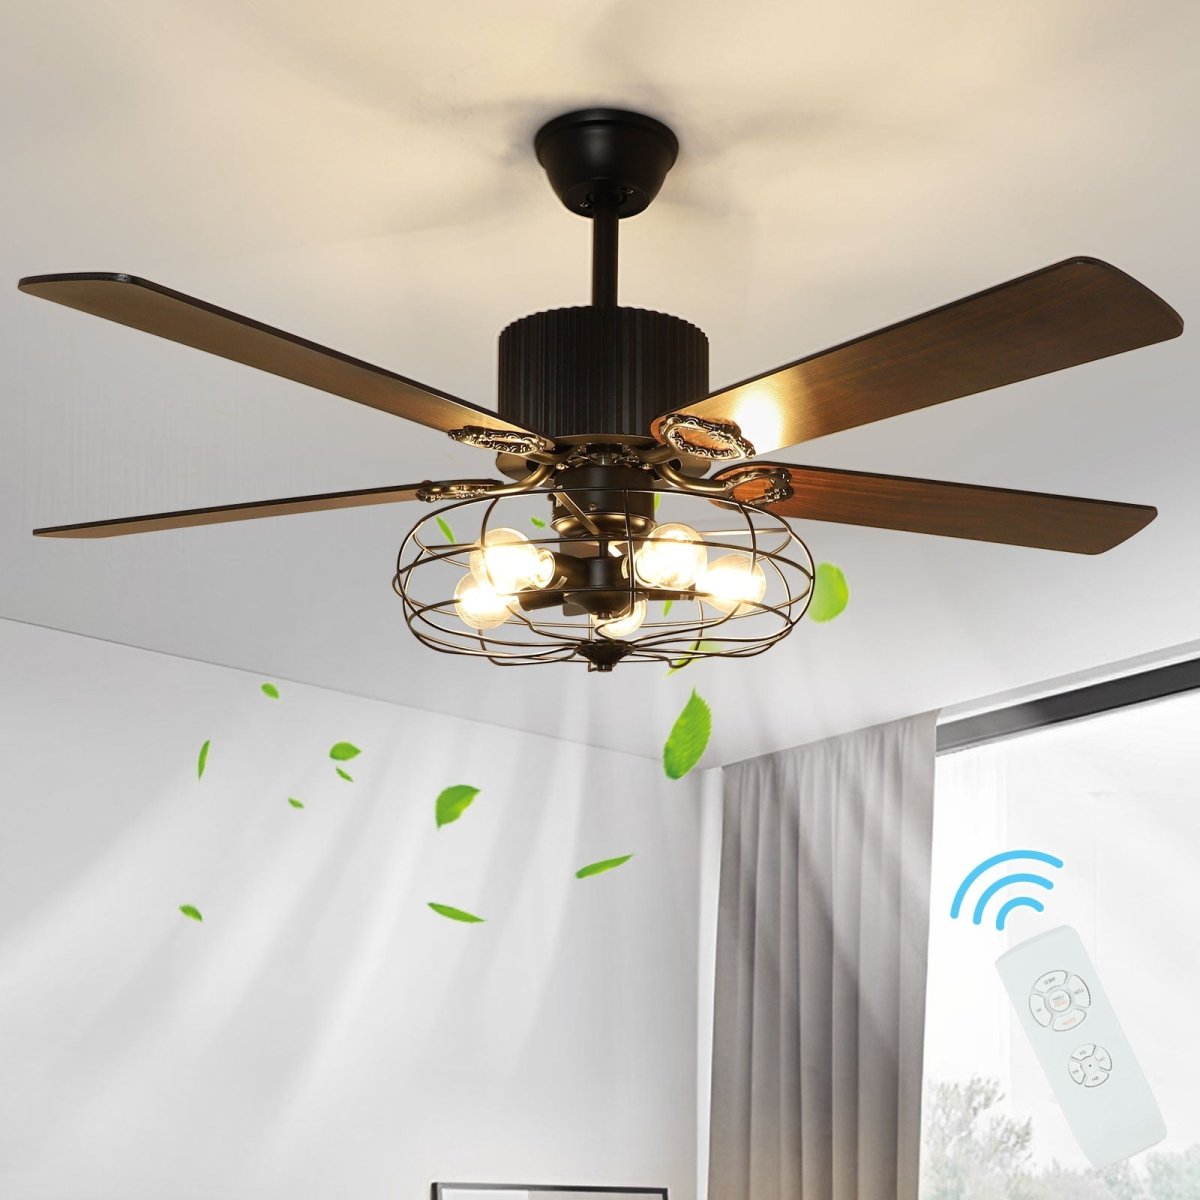 Depuley 52'' Caged Industrial Ceiling Fan with Light, Farmhouse Black Ceiling Fan with 5 Reversible Plywood Blades & Remote, Rustic Ceiling Fans Light Fixture for Bedroom, Timing, 5 E26 Bulbs Not Incl. - WS-FPZ21-60B 1 | DEPULEY